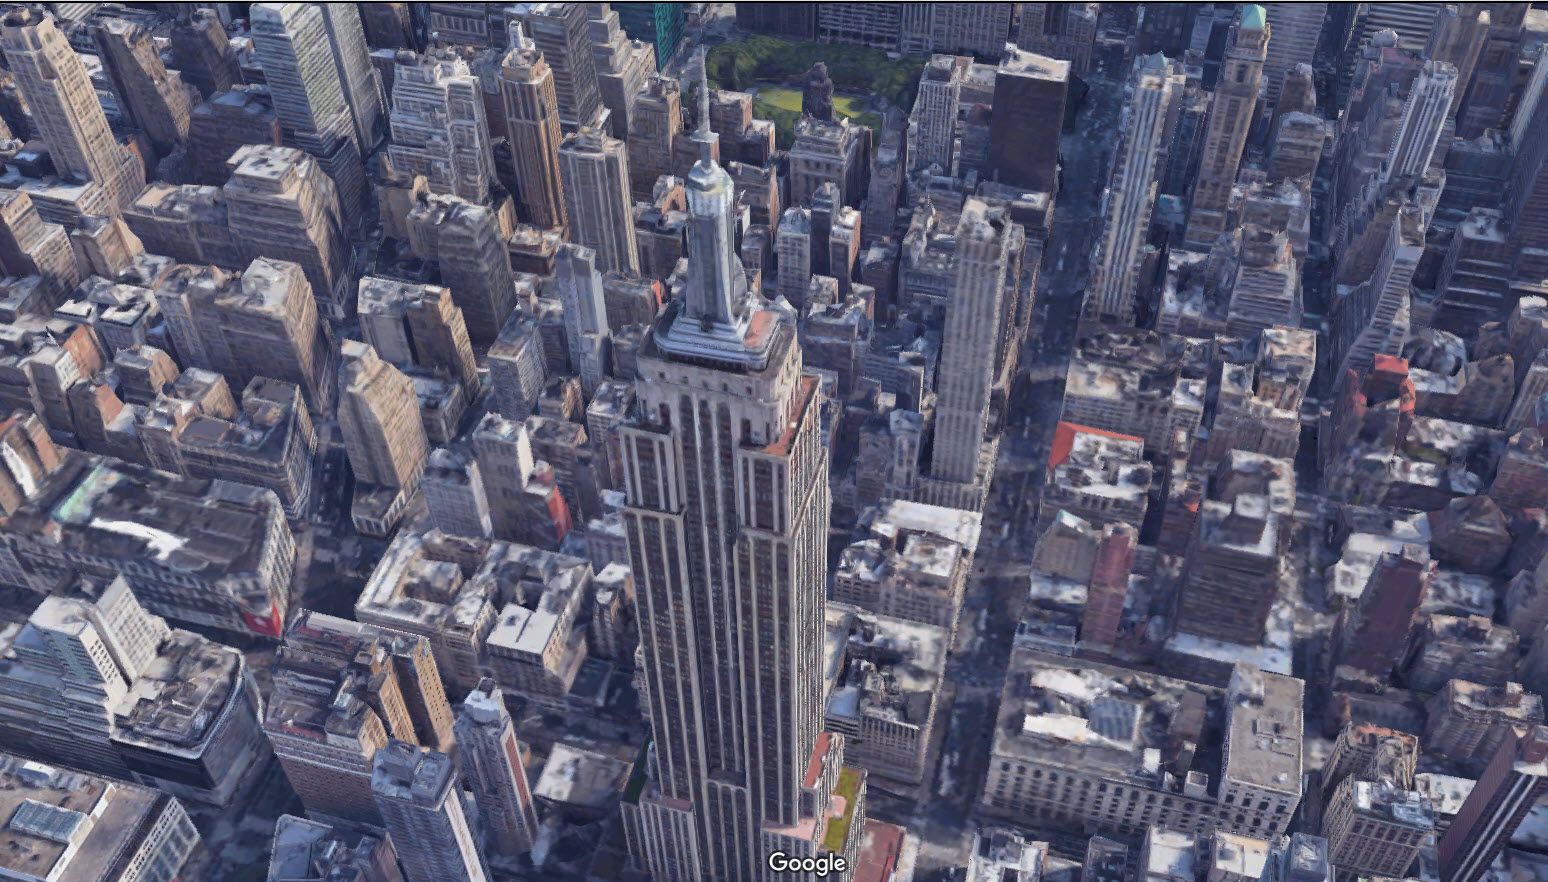 Google Maps Satellite View of The Empire State Building